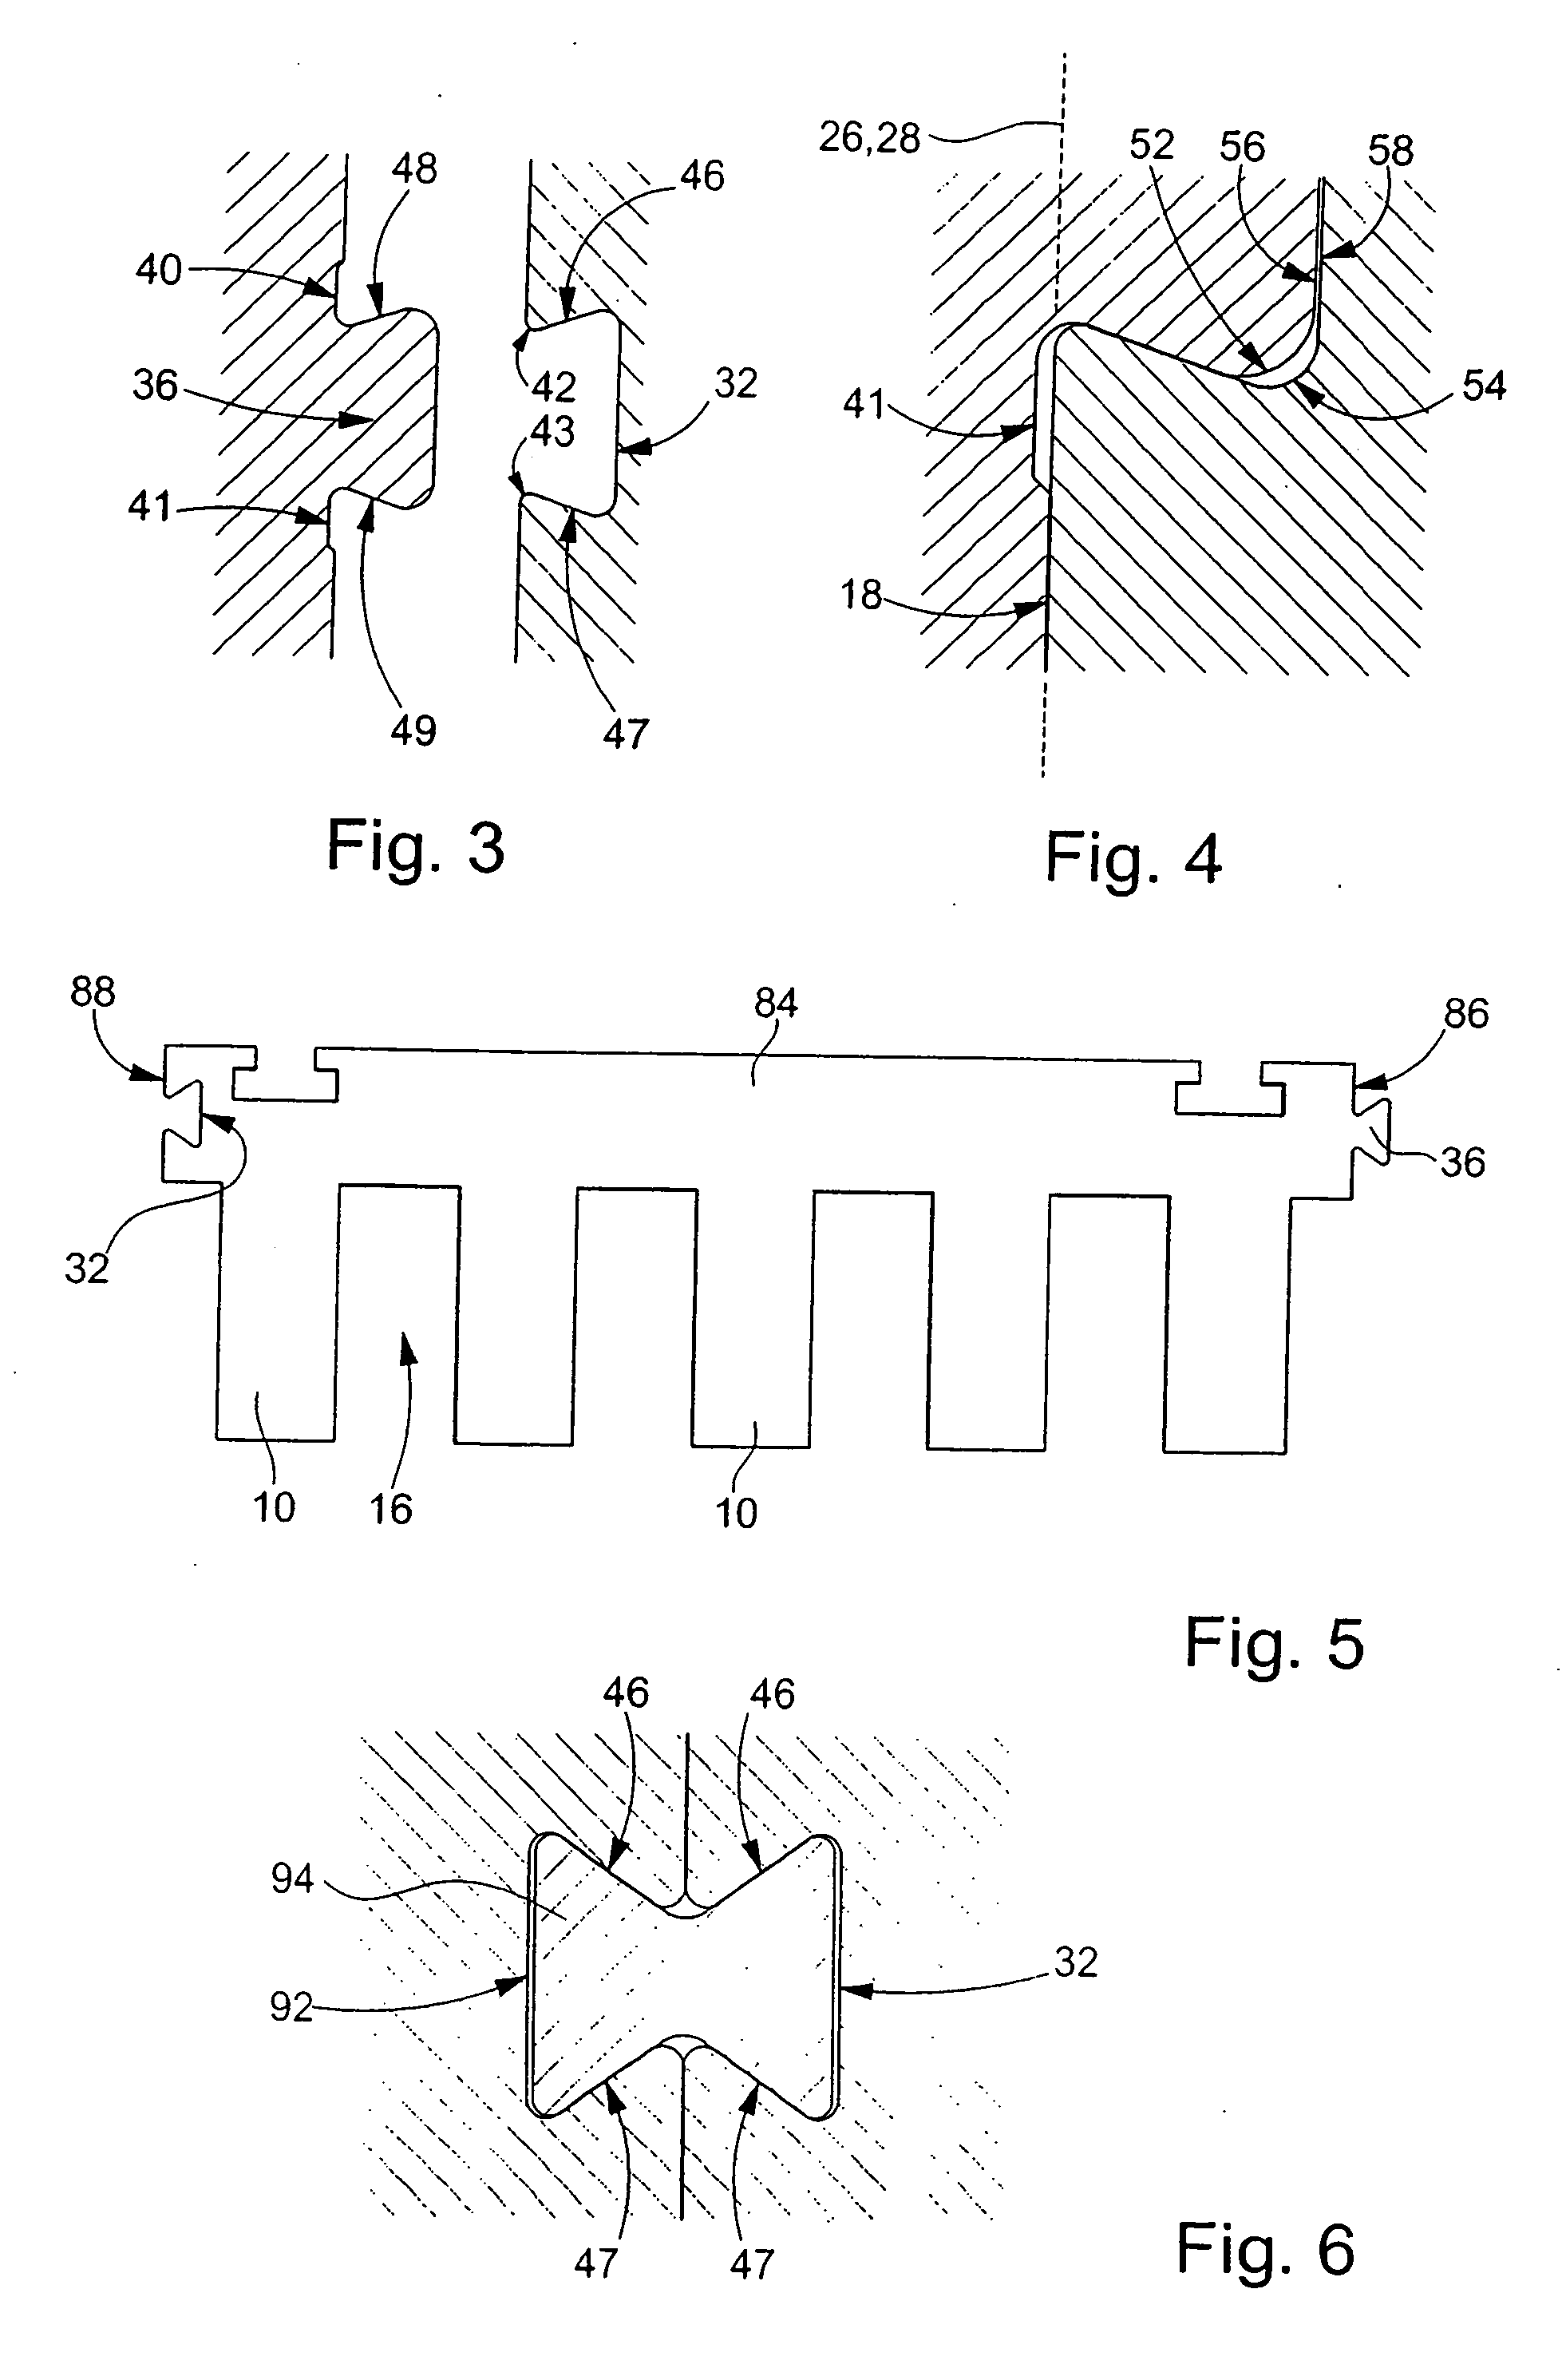 Linear motor with a segmented stator